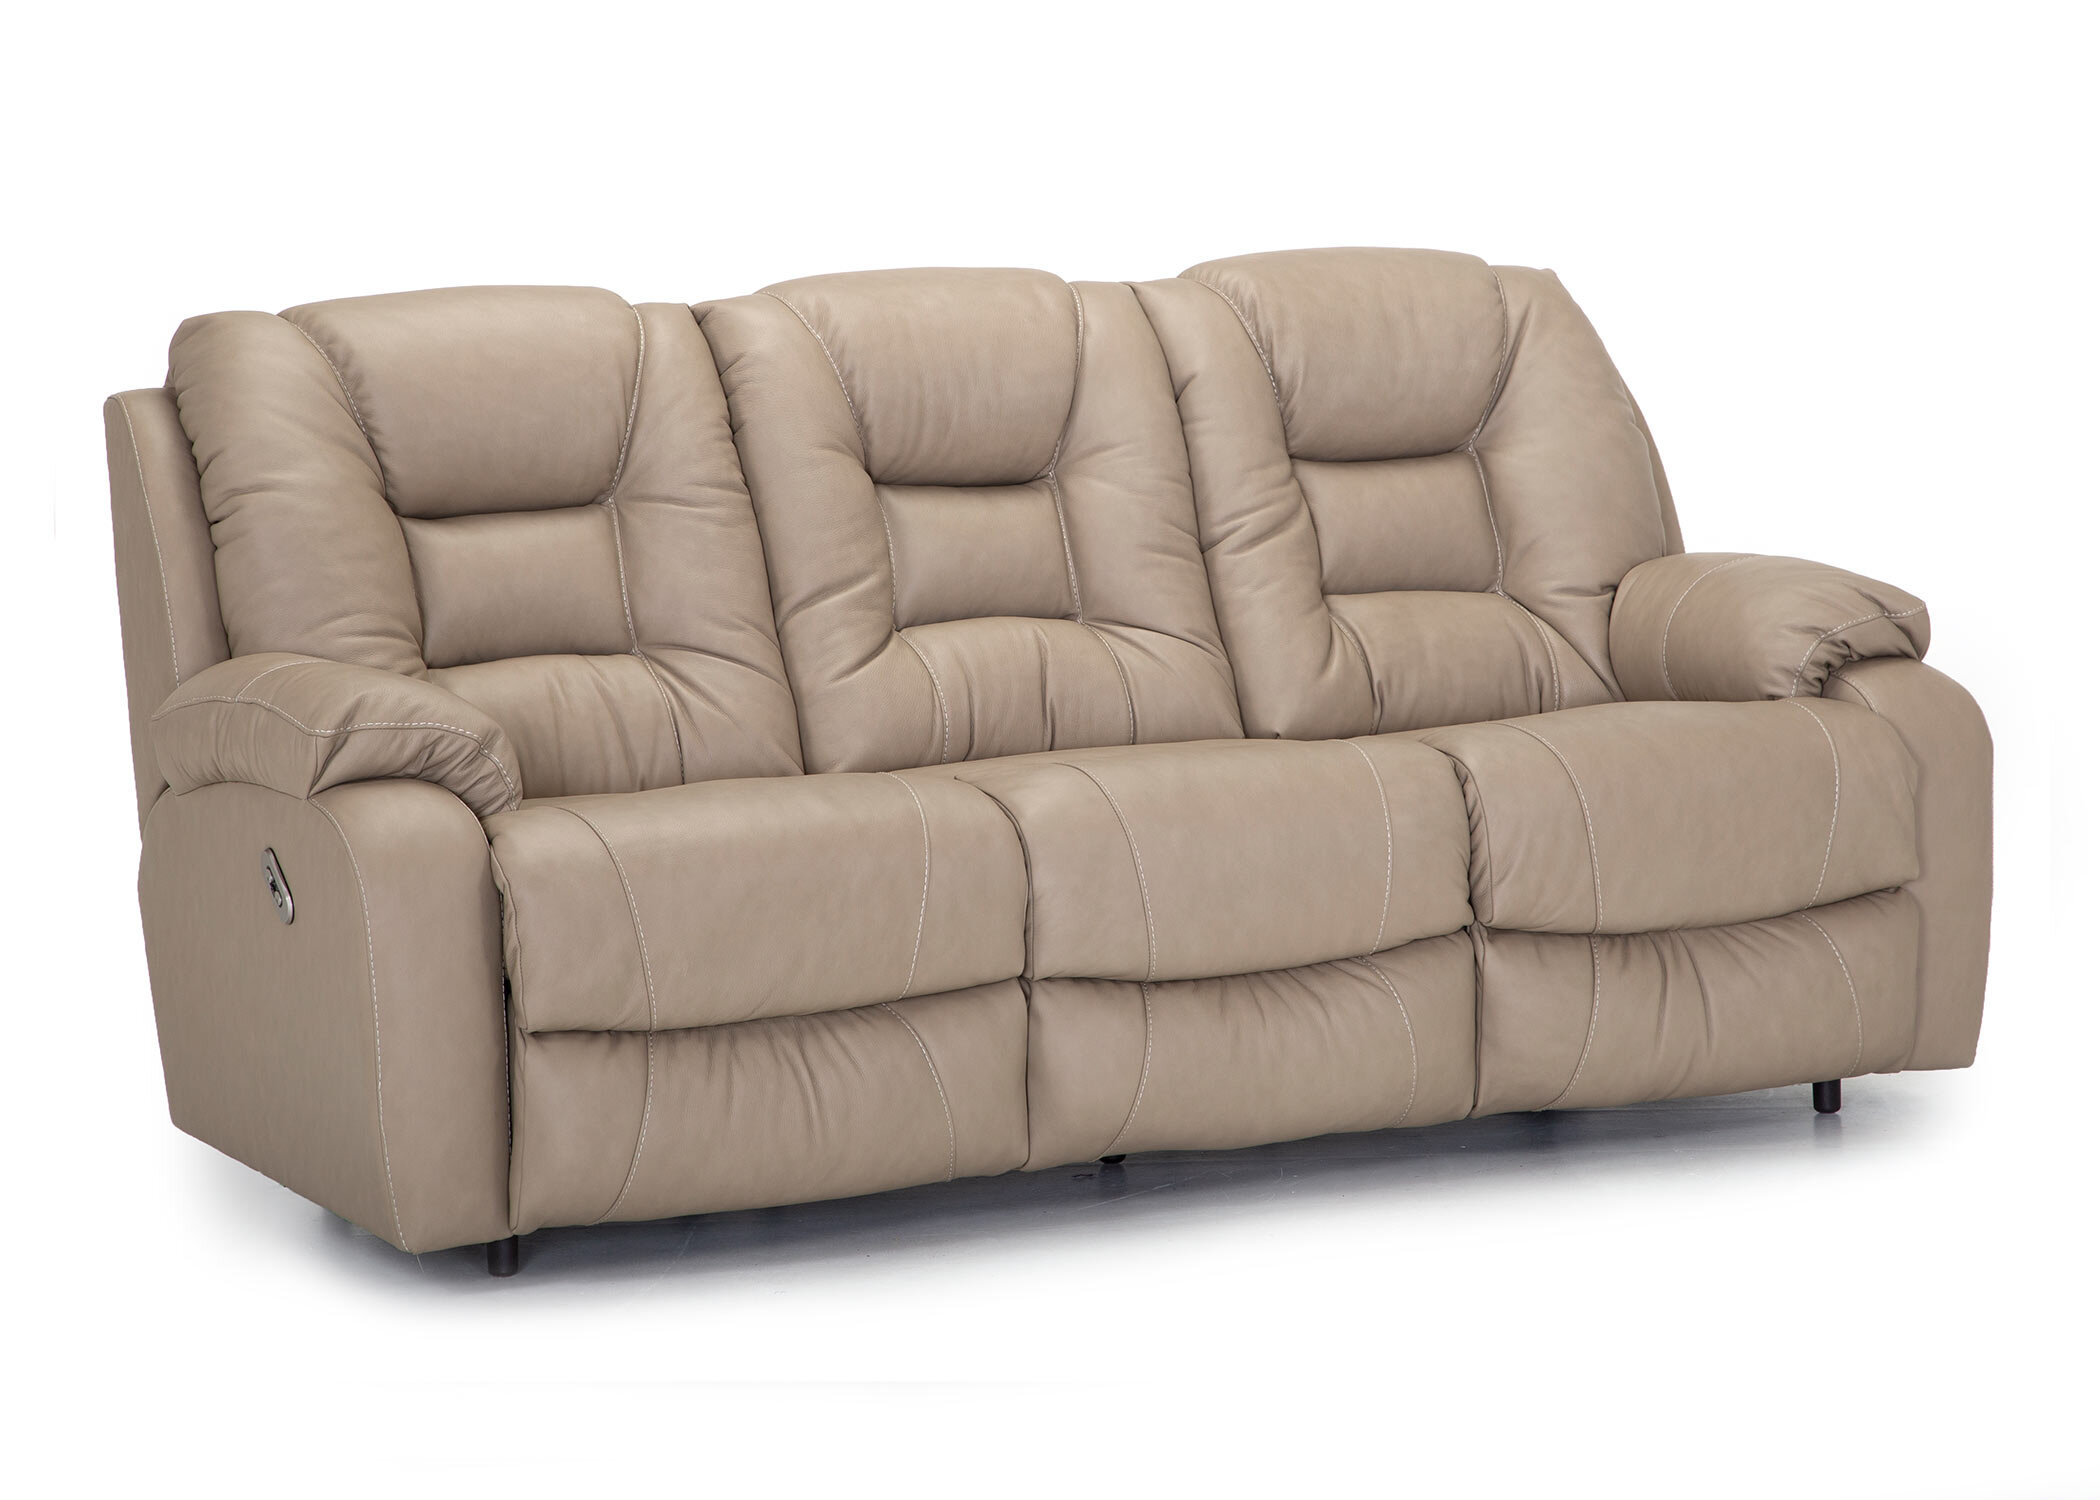  79442 Marco Reclining Sofa in LM 93-25 Mssisa Cappuccino 